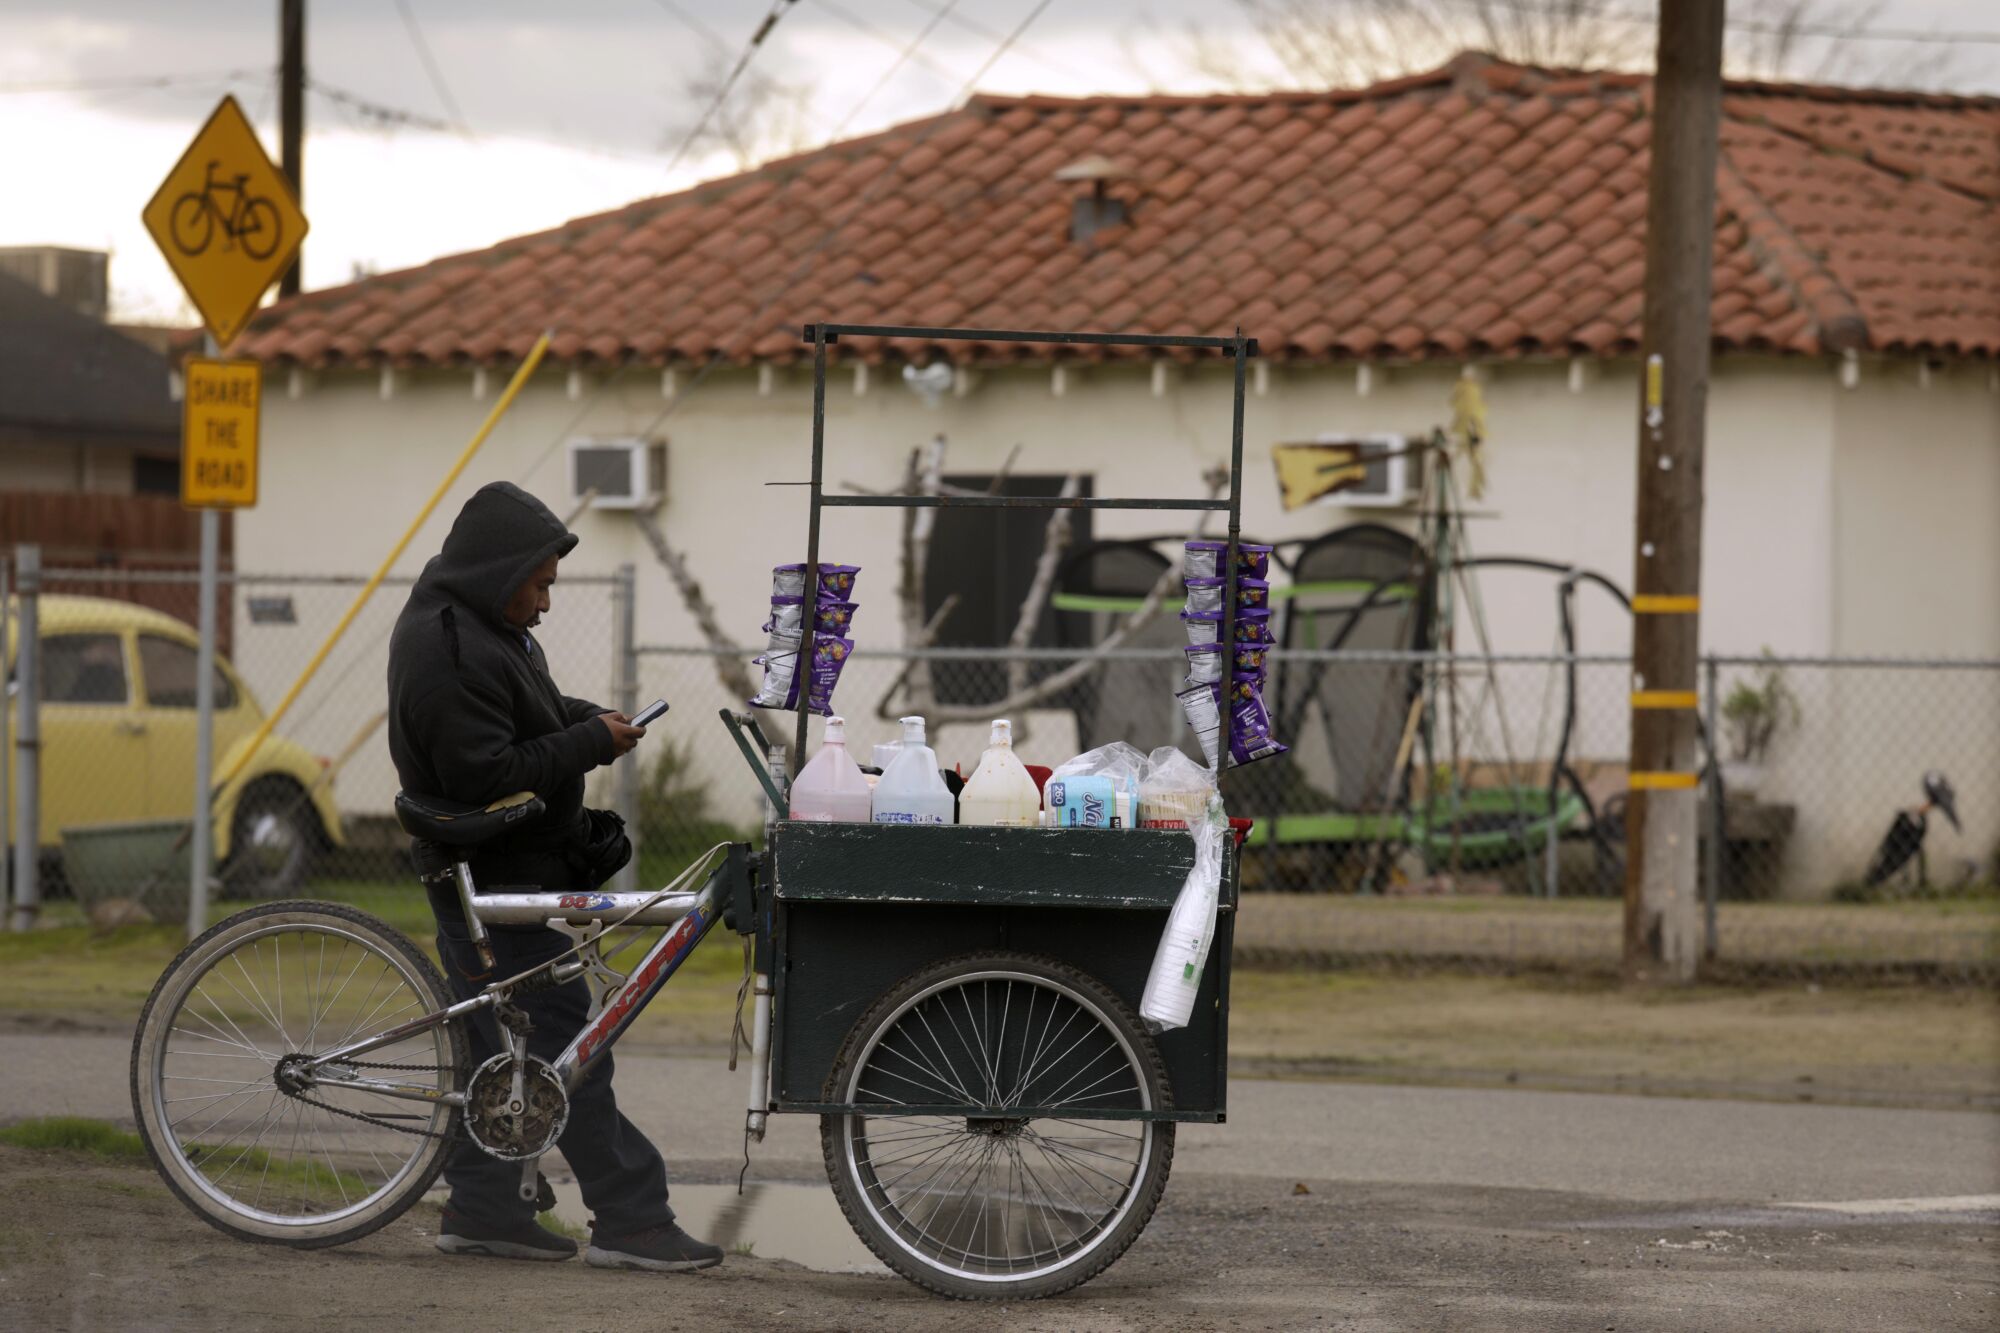 A man pauses by a cart selling aguas frescas.